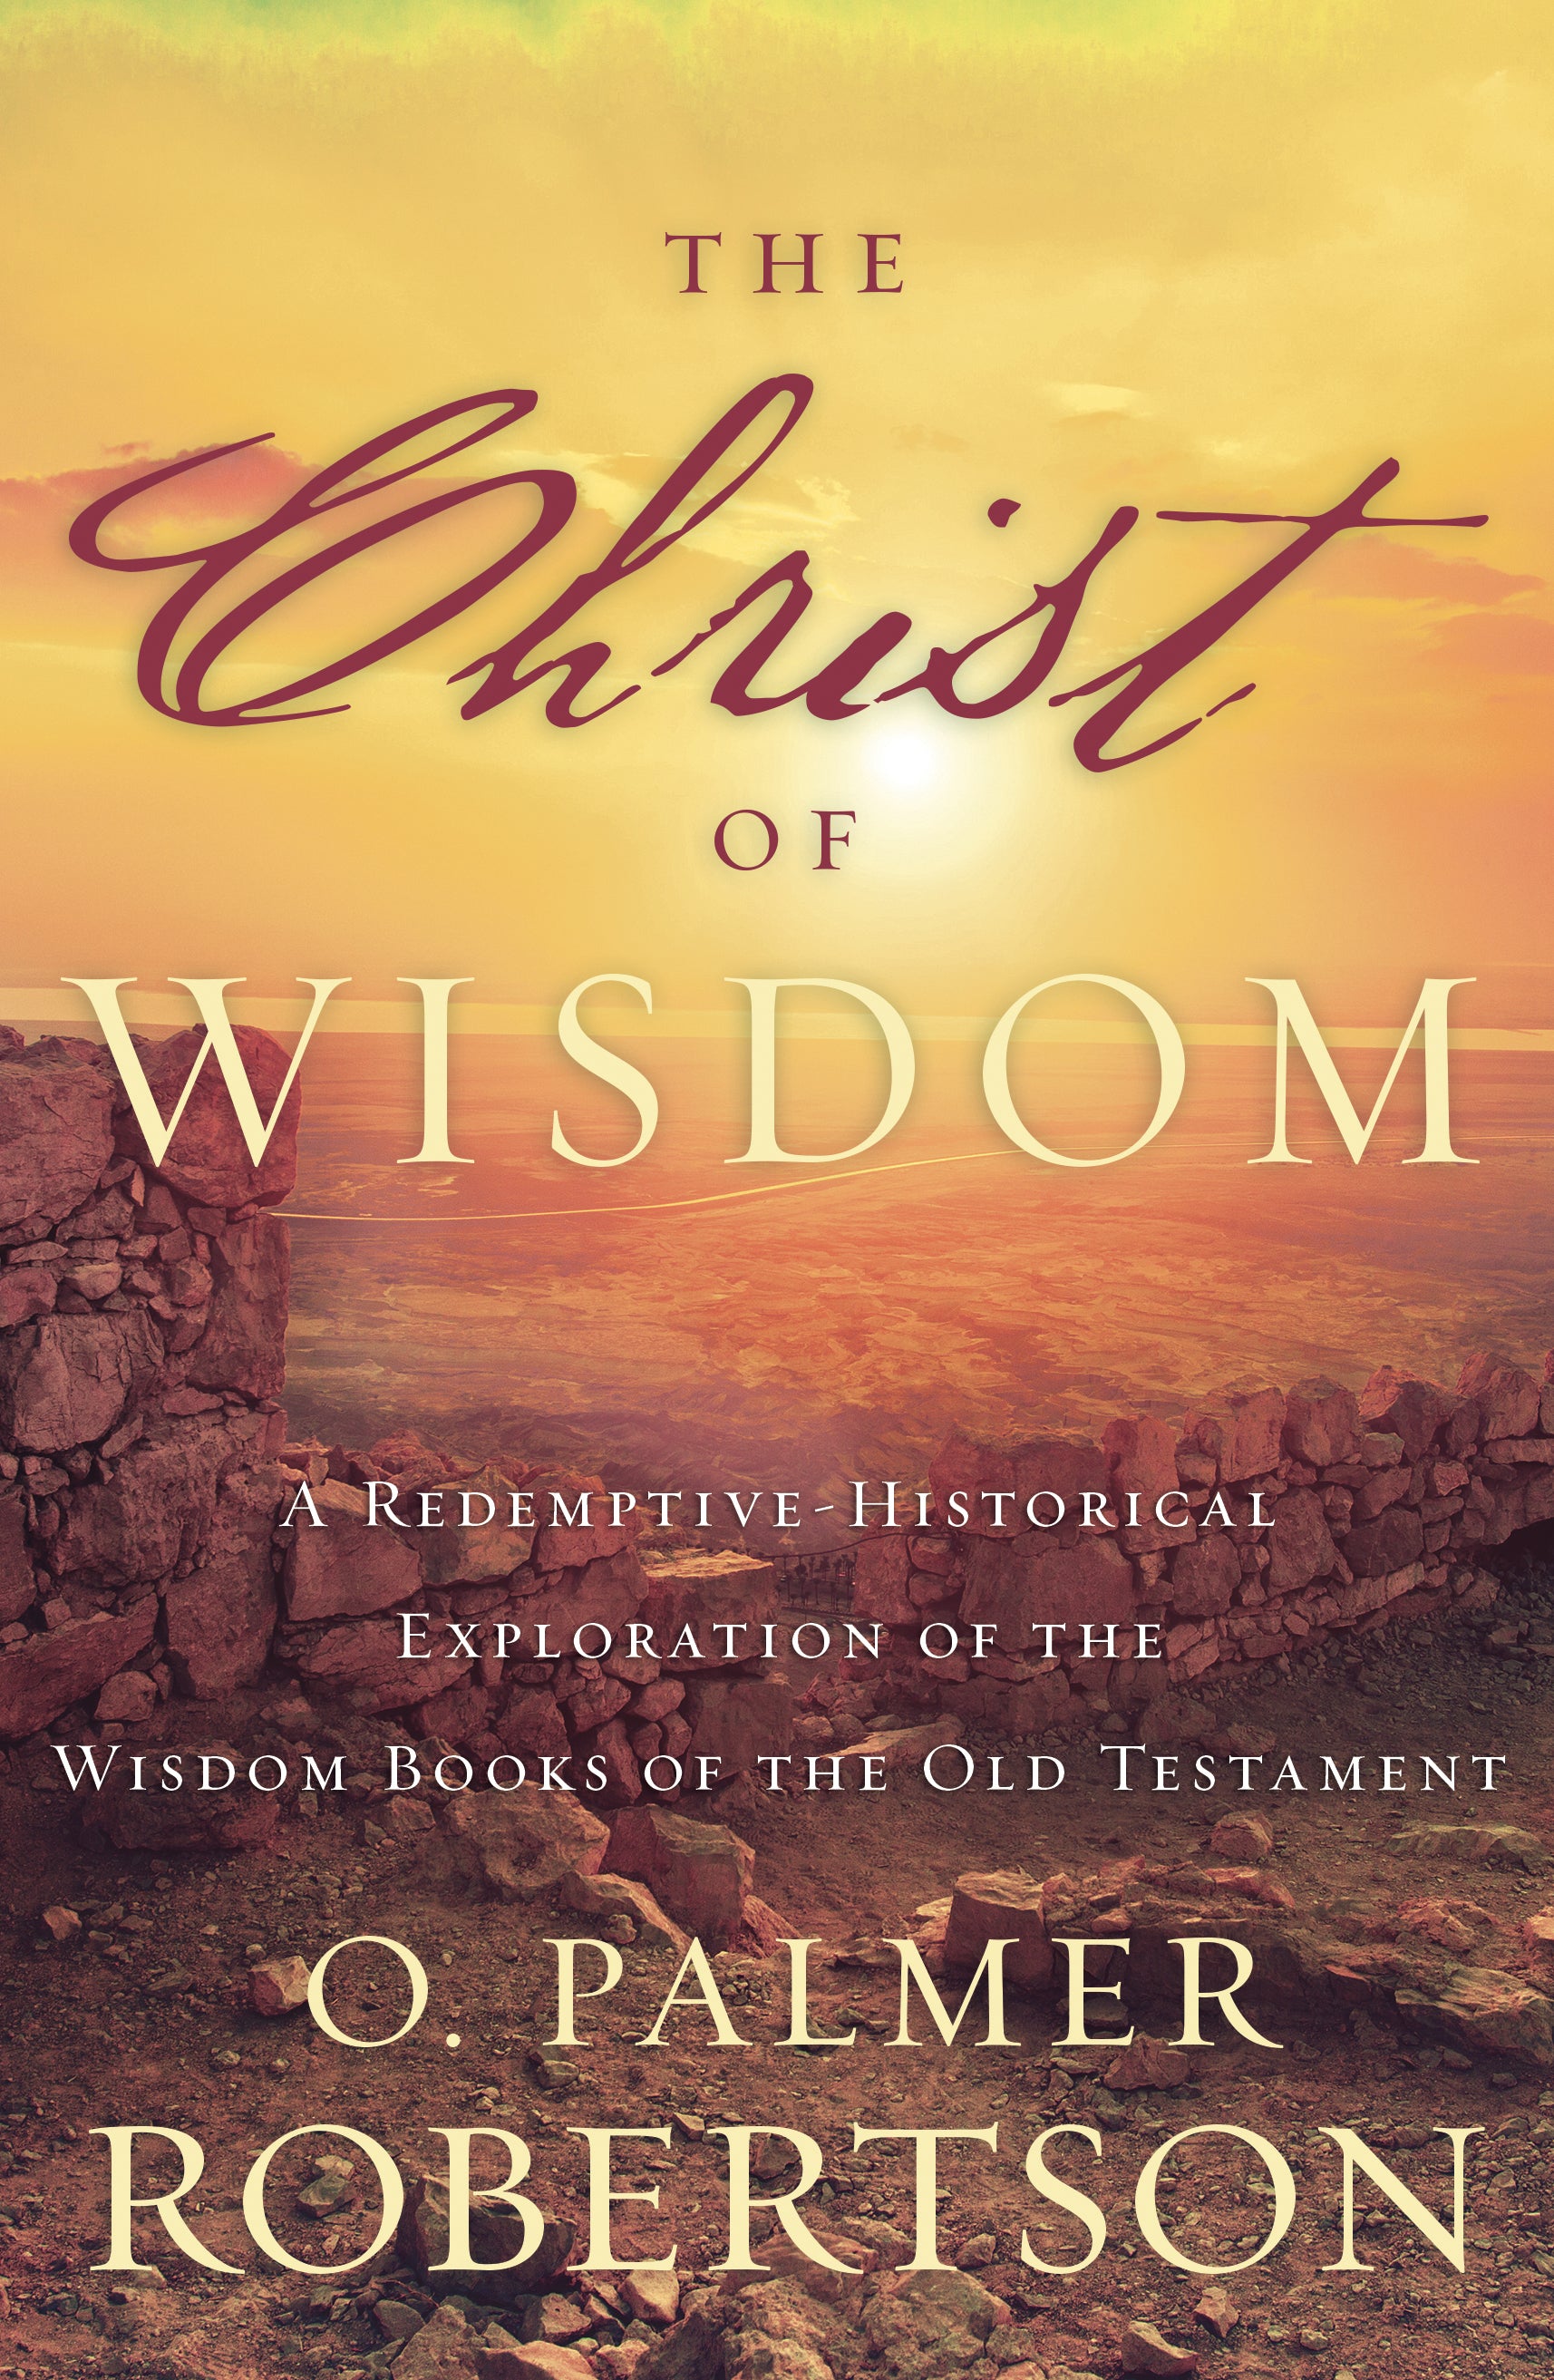 Testament　Bookstore　the　–　O.　A　The　Wisdom:　Wisdom　Redemptive-Historical　Robertson,　of　Exploration　Old　Christ　Westminster　Books　of　of　9781629952918　the　Palmer